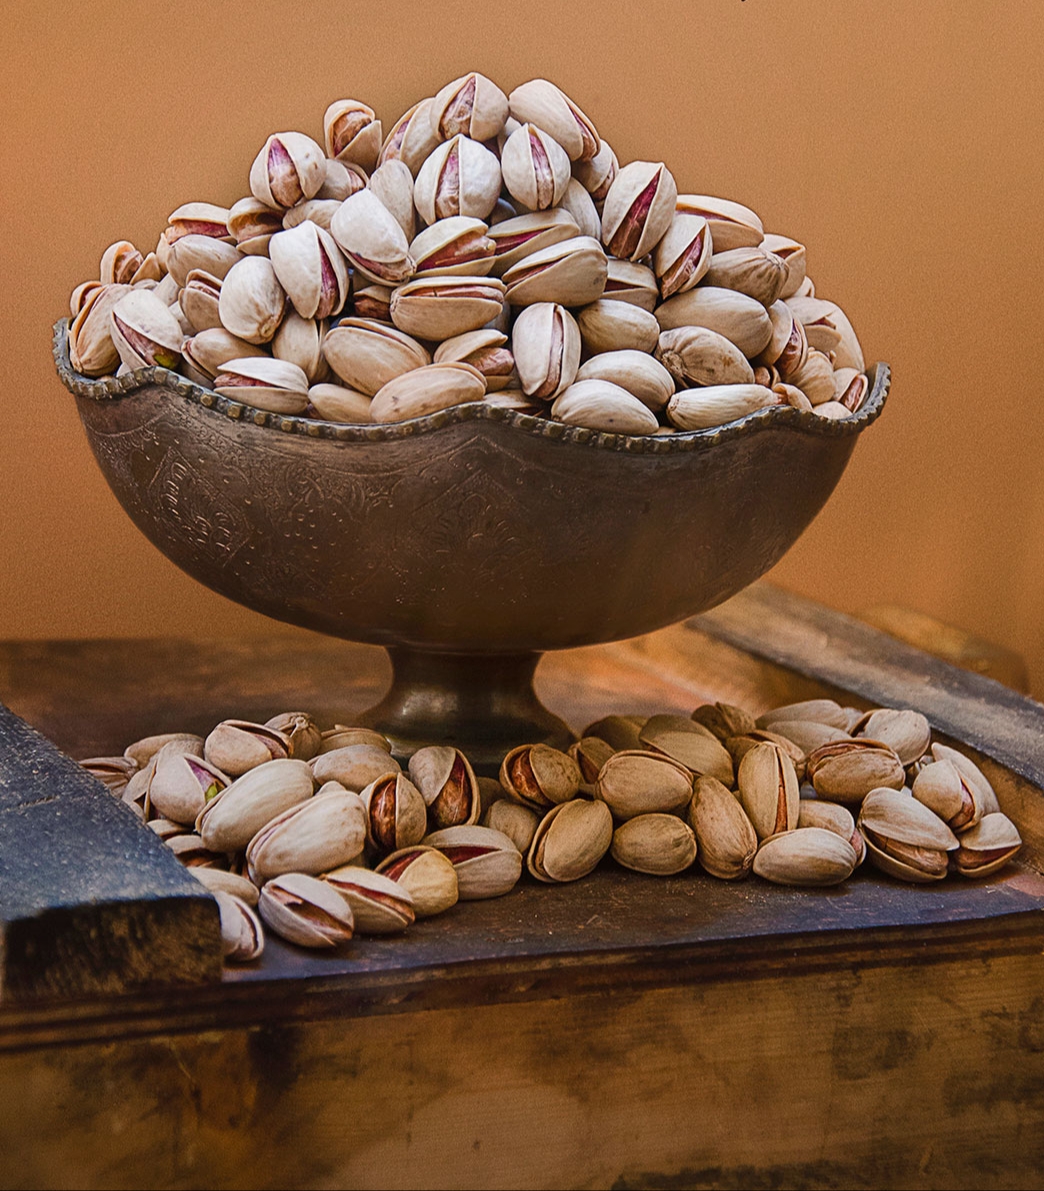 Purchase price of Iranian pistachios